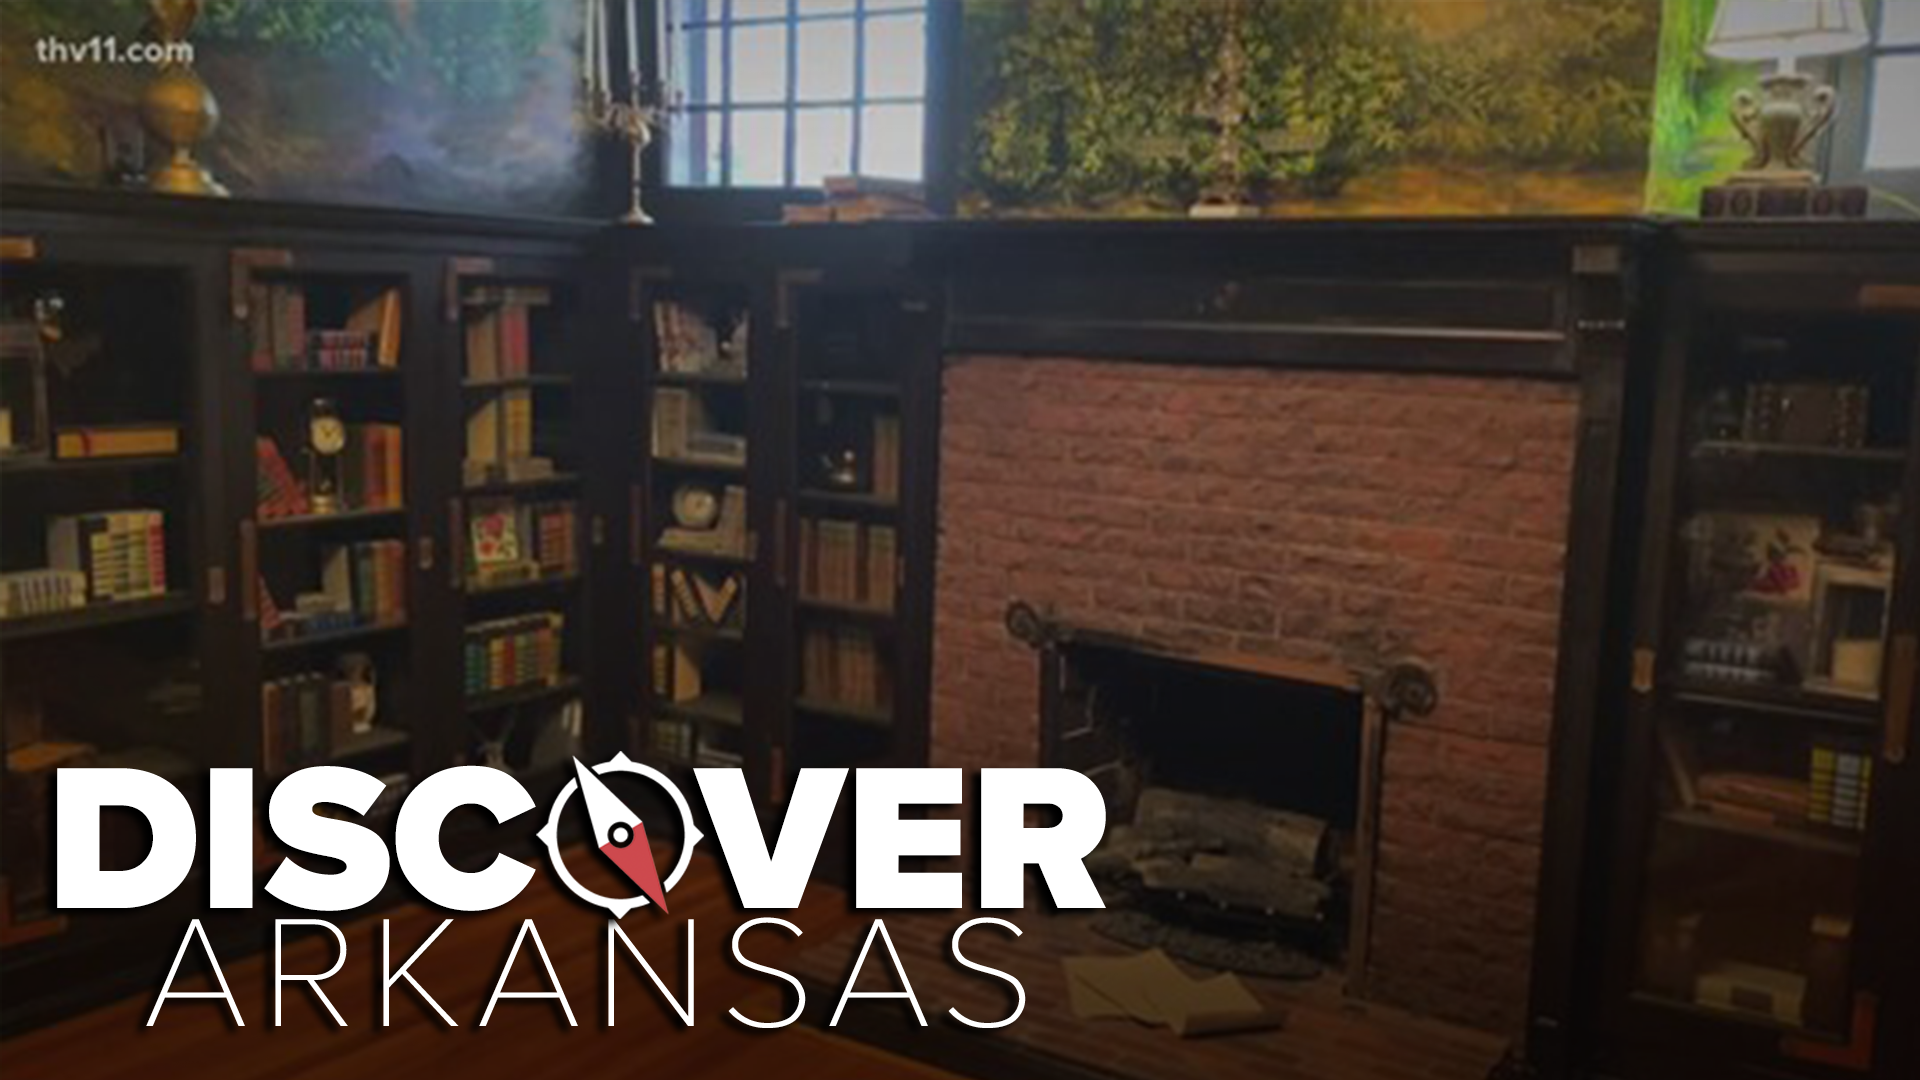 In this week's Discover Arkansas, Ashley King takes us to the mystery mansion escape rooms and she even brought along a special guest.